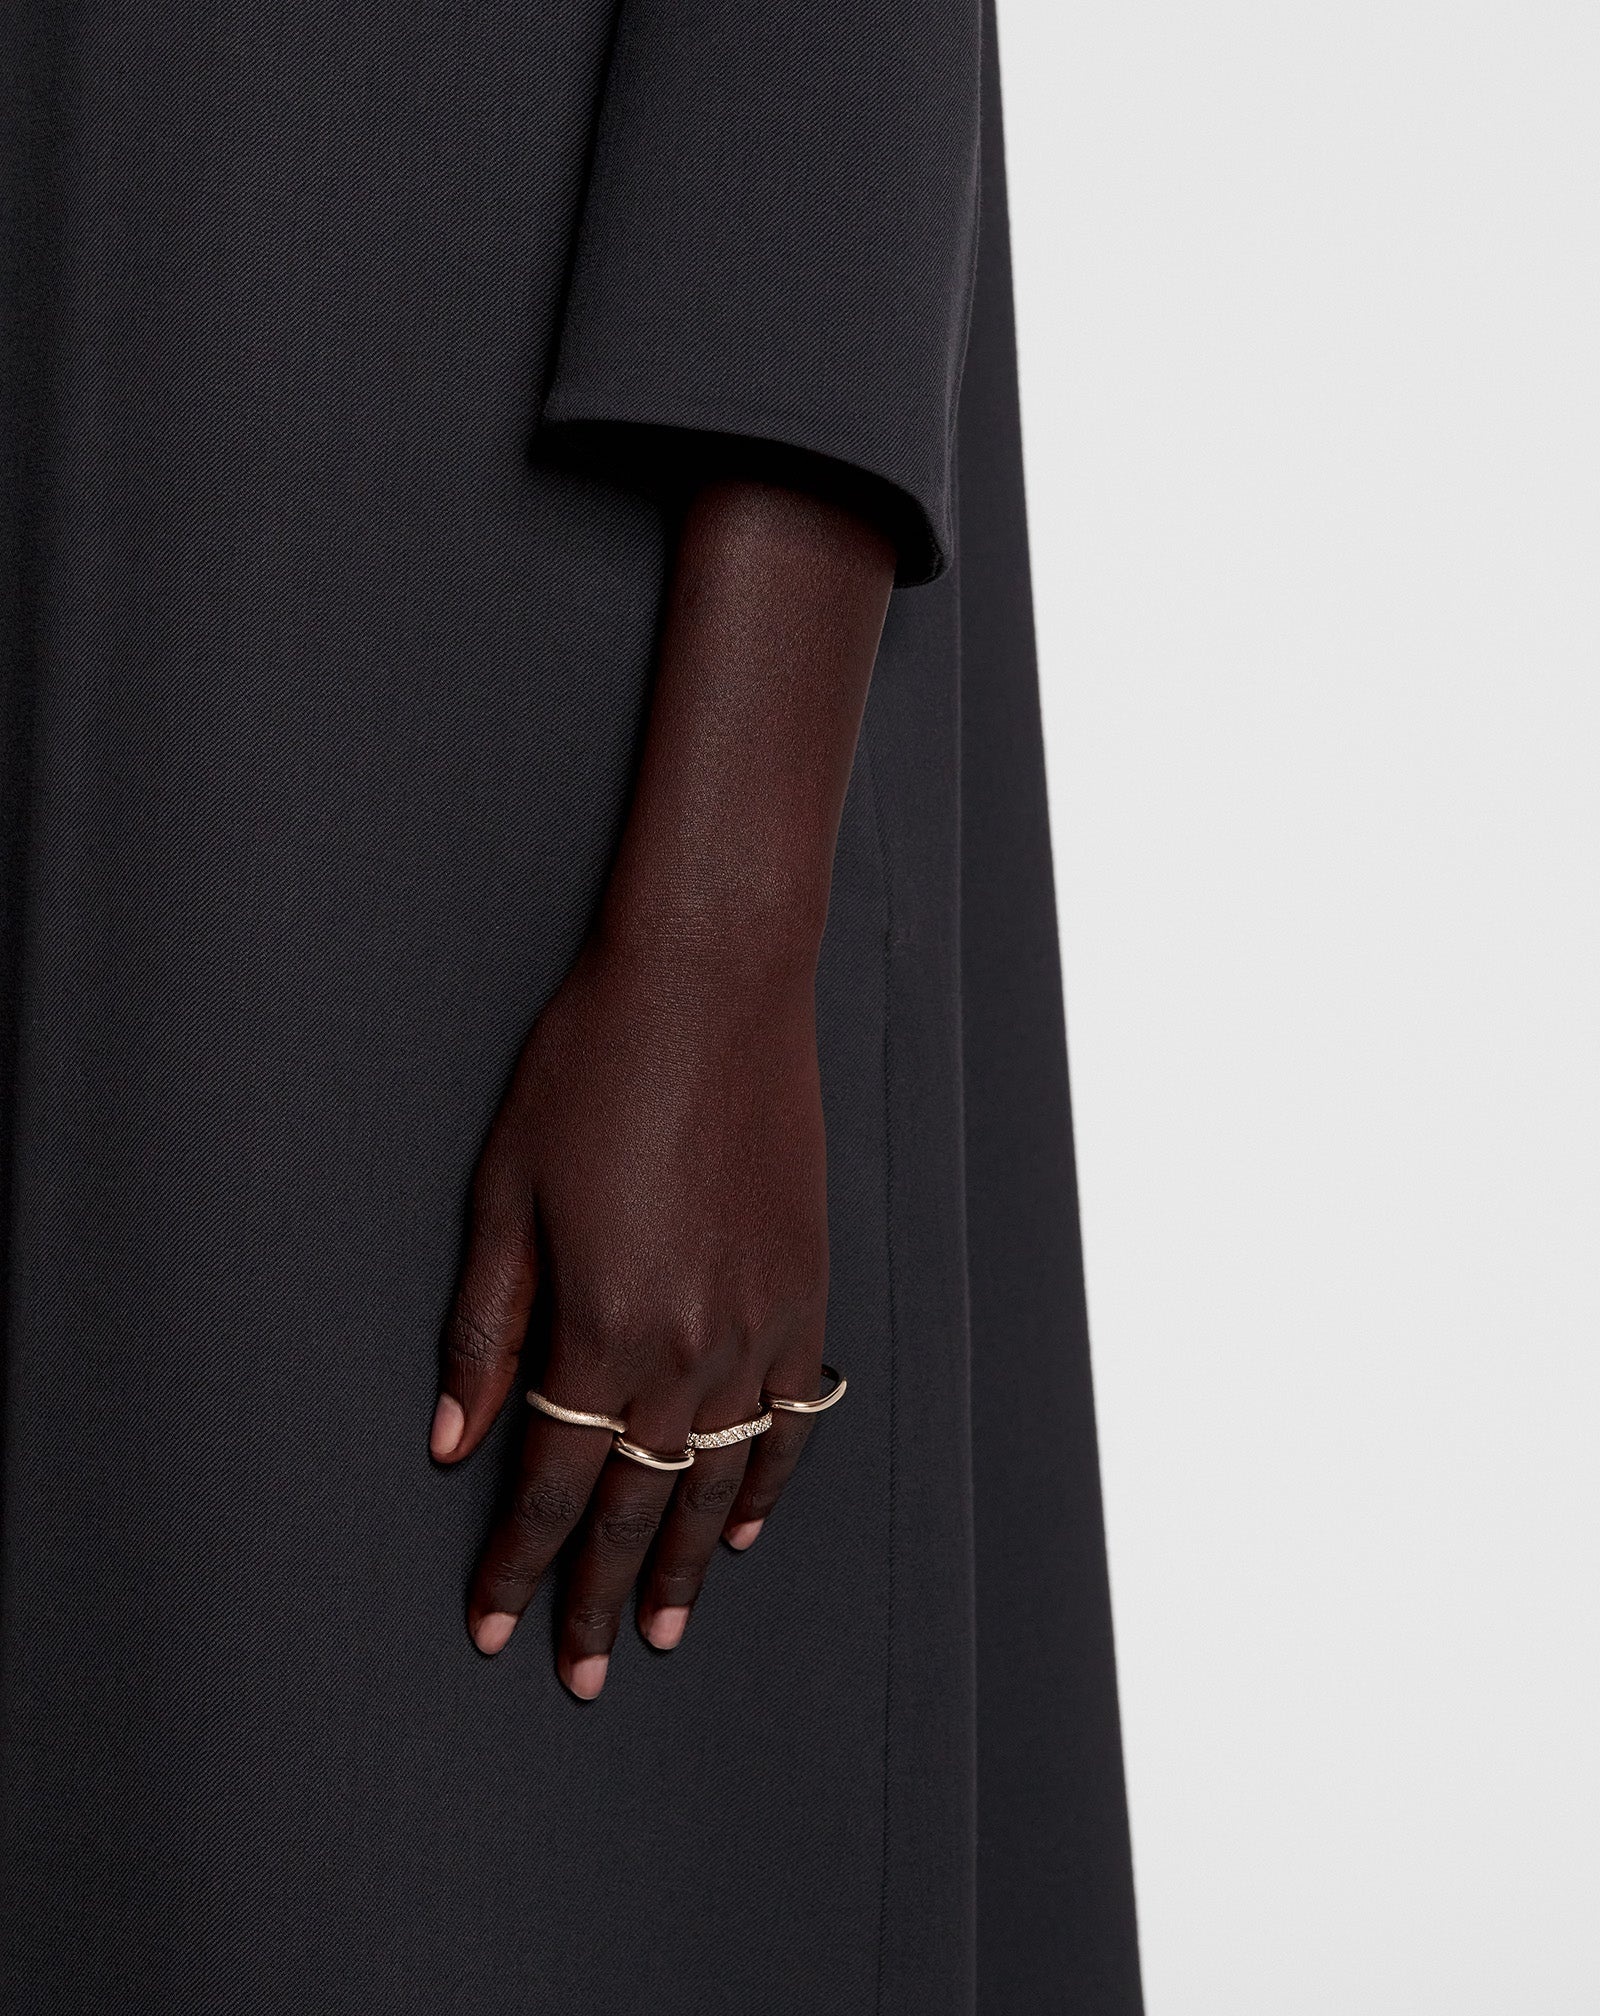 PARTITION BY LANVIN RING - 3